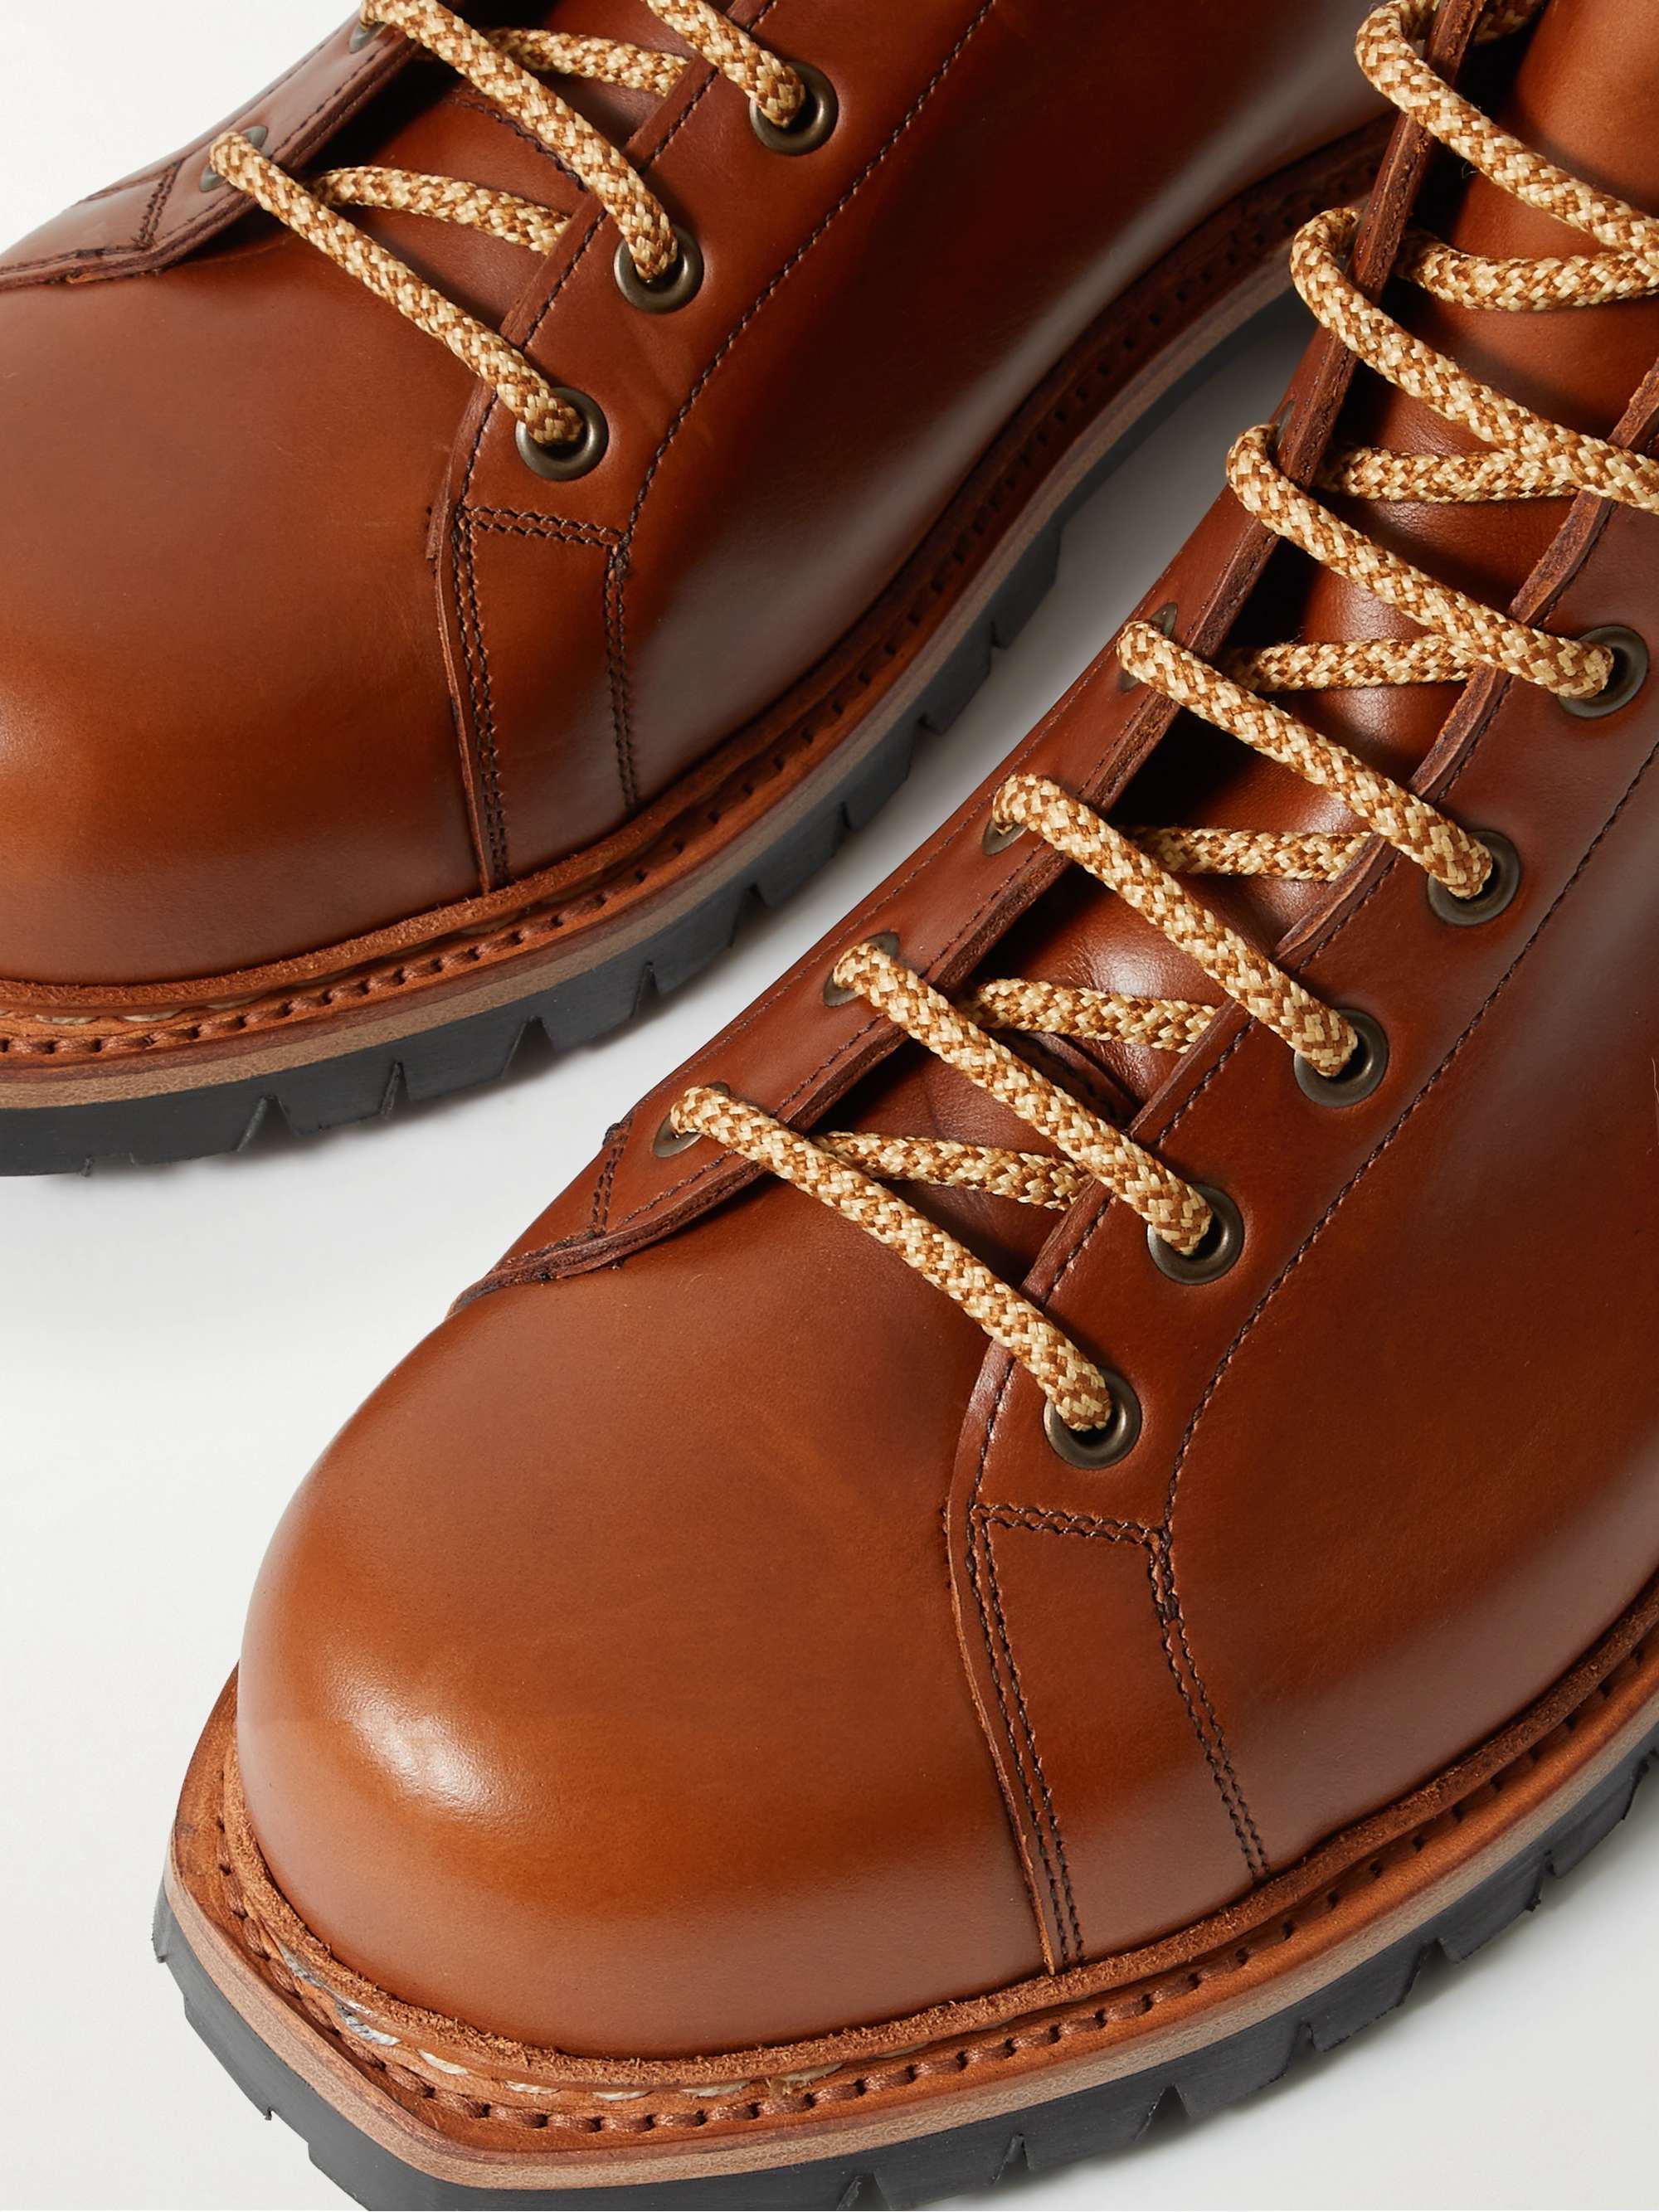 GEORGE CLEVERLEY Edmund Leather Boots